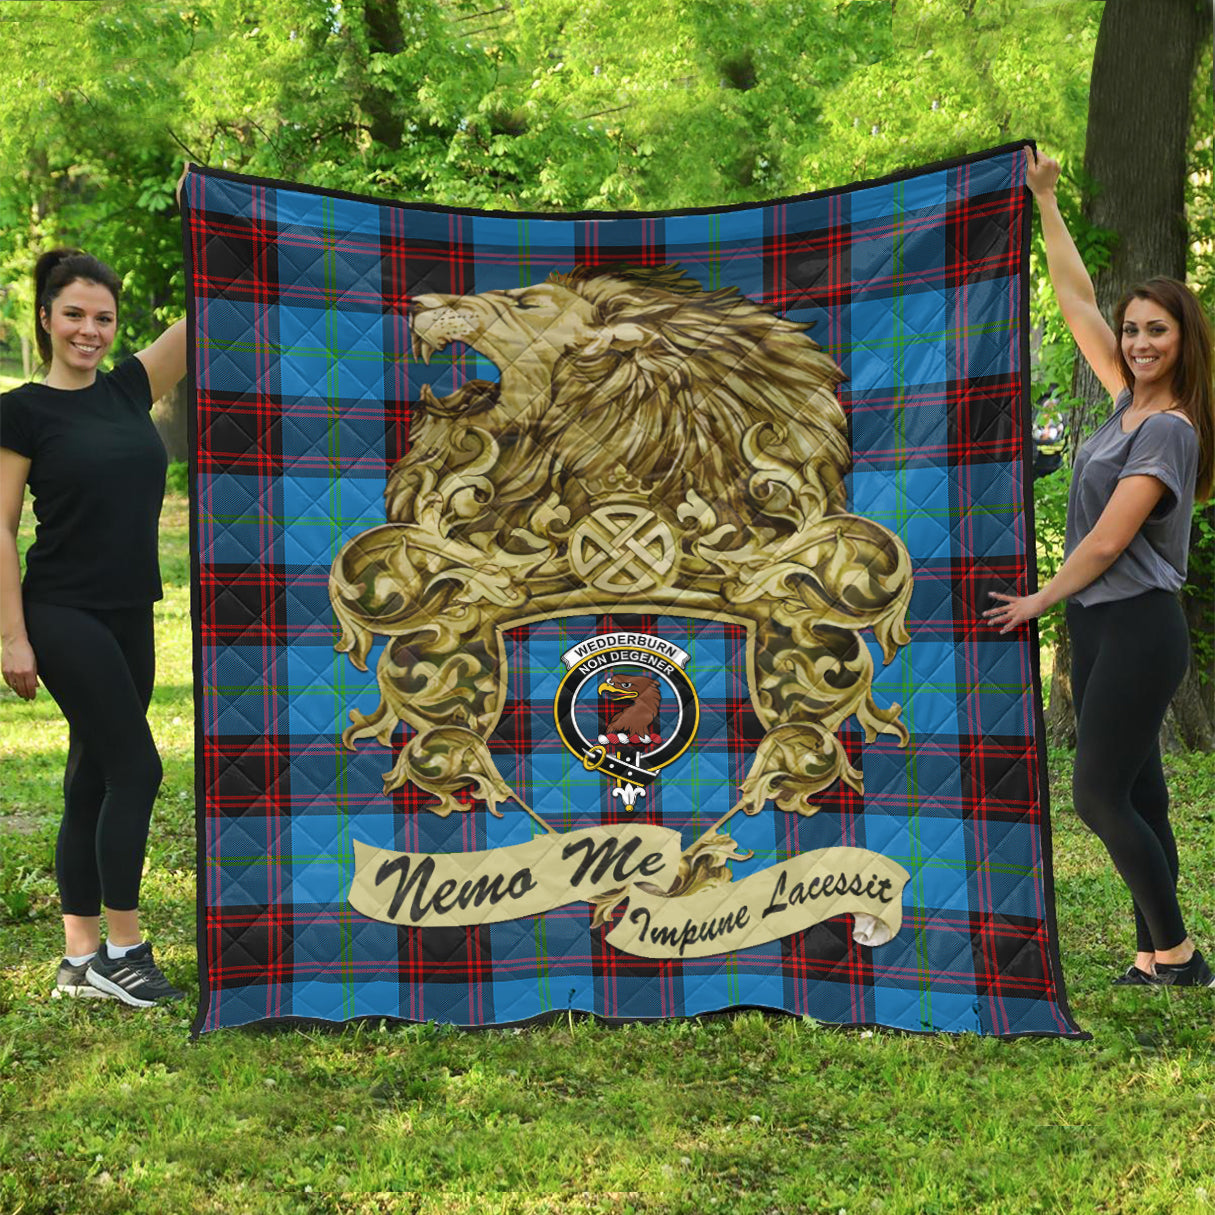 wedderburn-tartan-quilt-with-motto-nemo-me-impune-lacessit-with-vintage-lion-family-crest-tartan-quilt-pattern-scottish-tartan-plaid-quilt-vintage-style